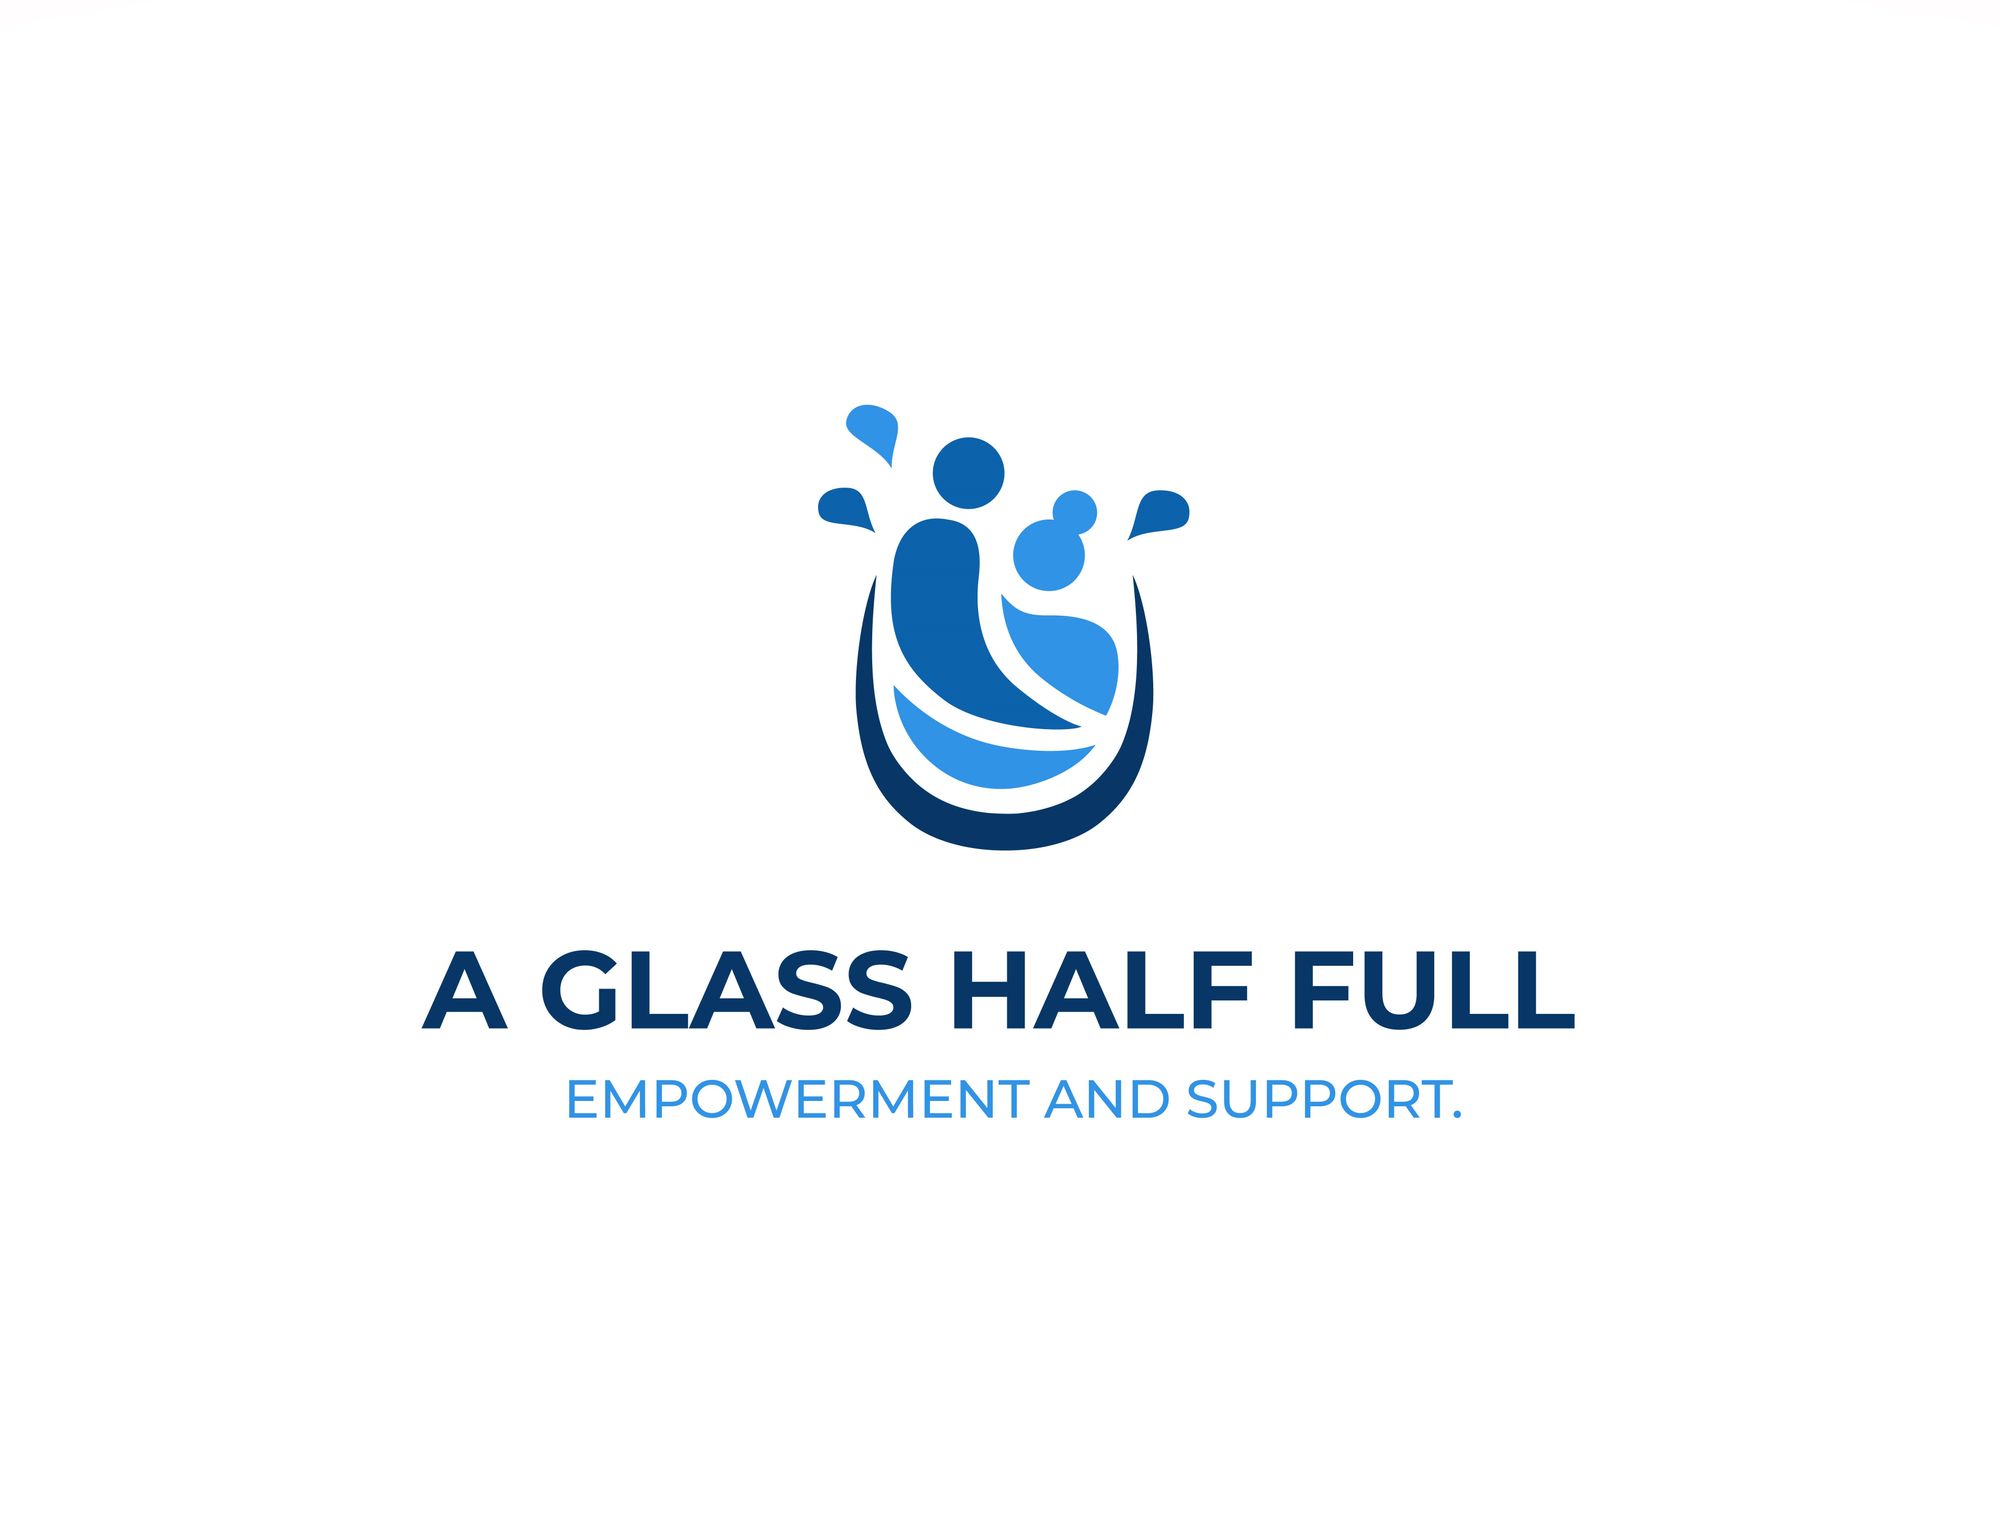 Equality and Support - A Glass Half Full